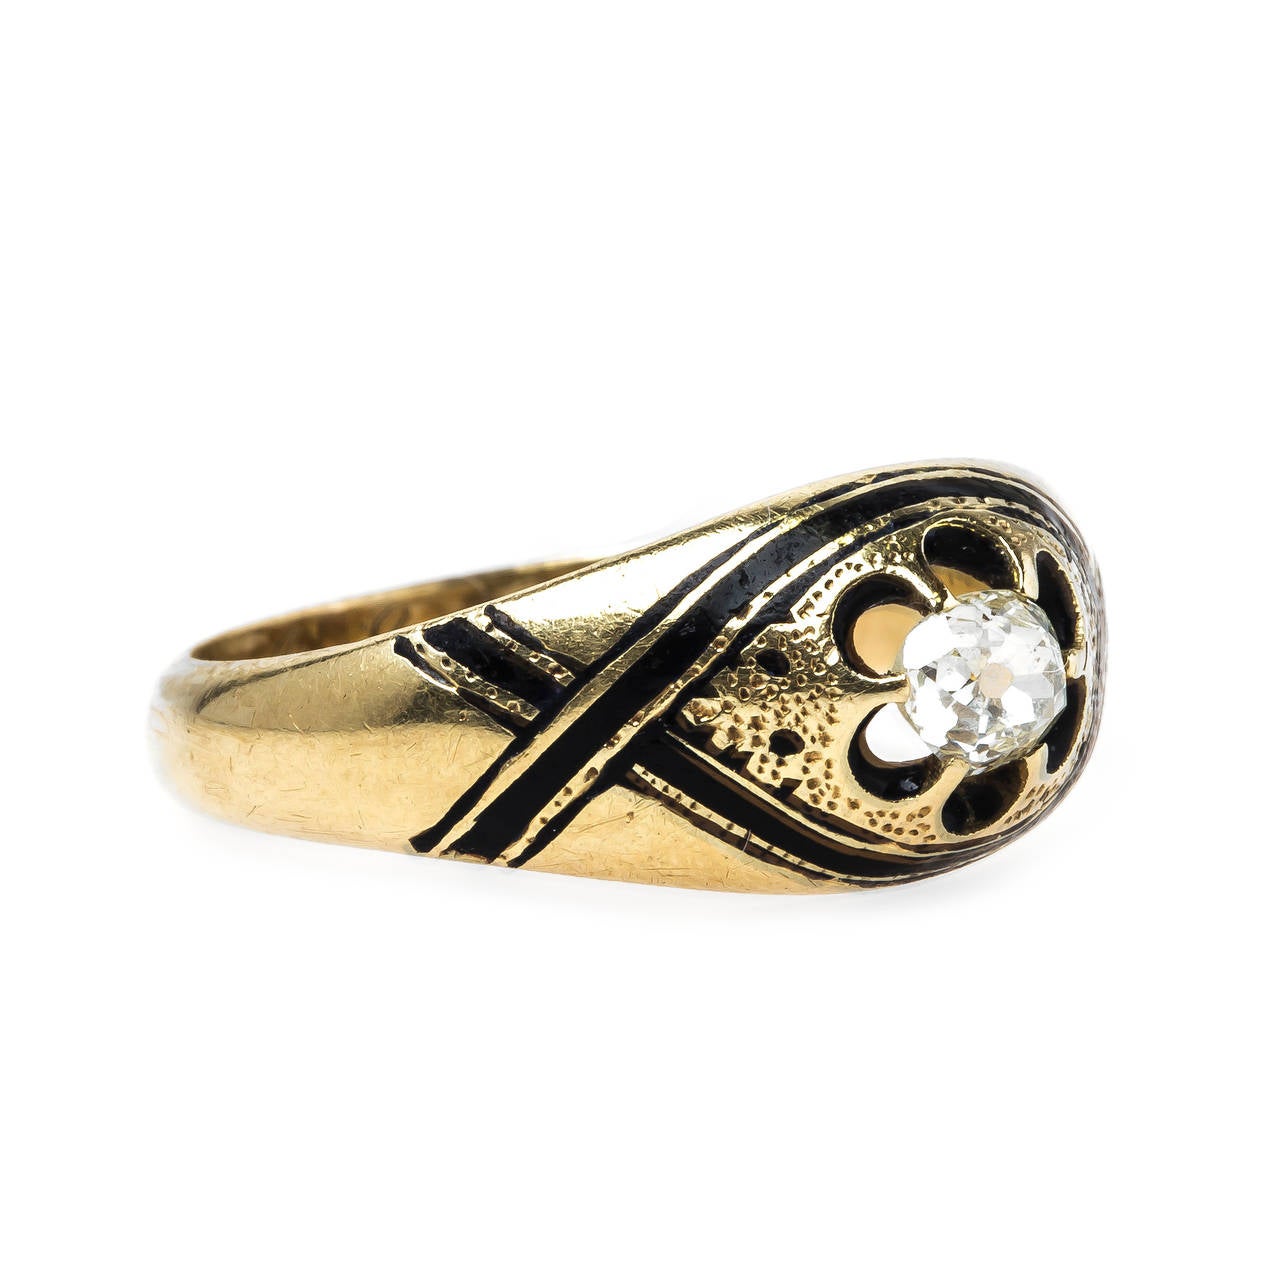 Wilshire is splendid early Victorian era (circa 1850) 14k yellow gold bombe style ring centering a solitary Old Mine Cut diamond gauged at approximately 0.20ct graded K-L color and VS1 clarity set within a beautiful six prong setting and bordered by